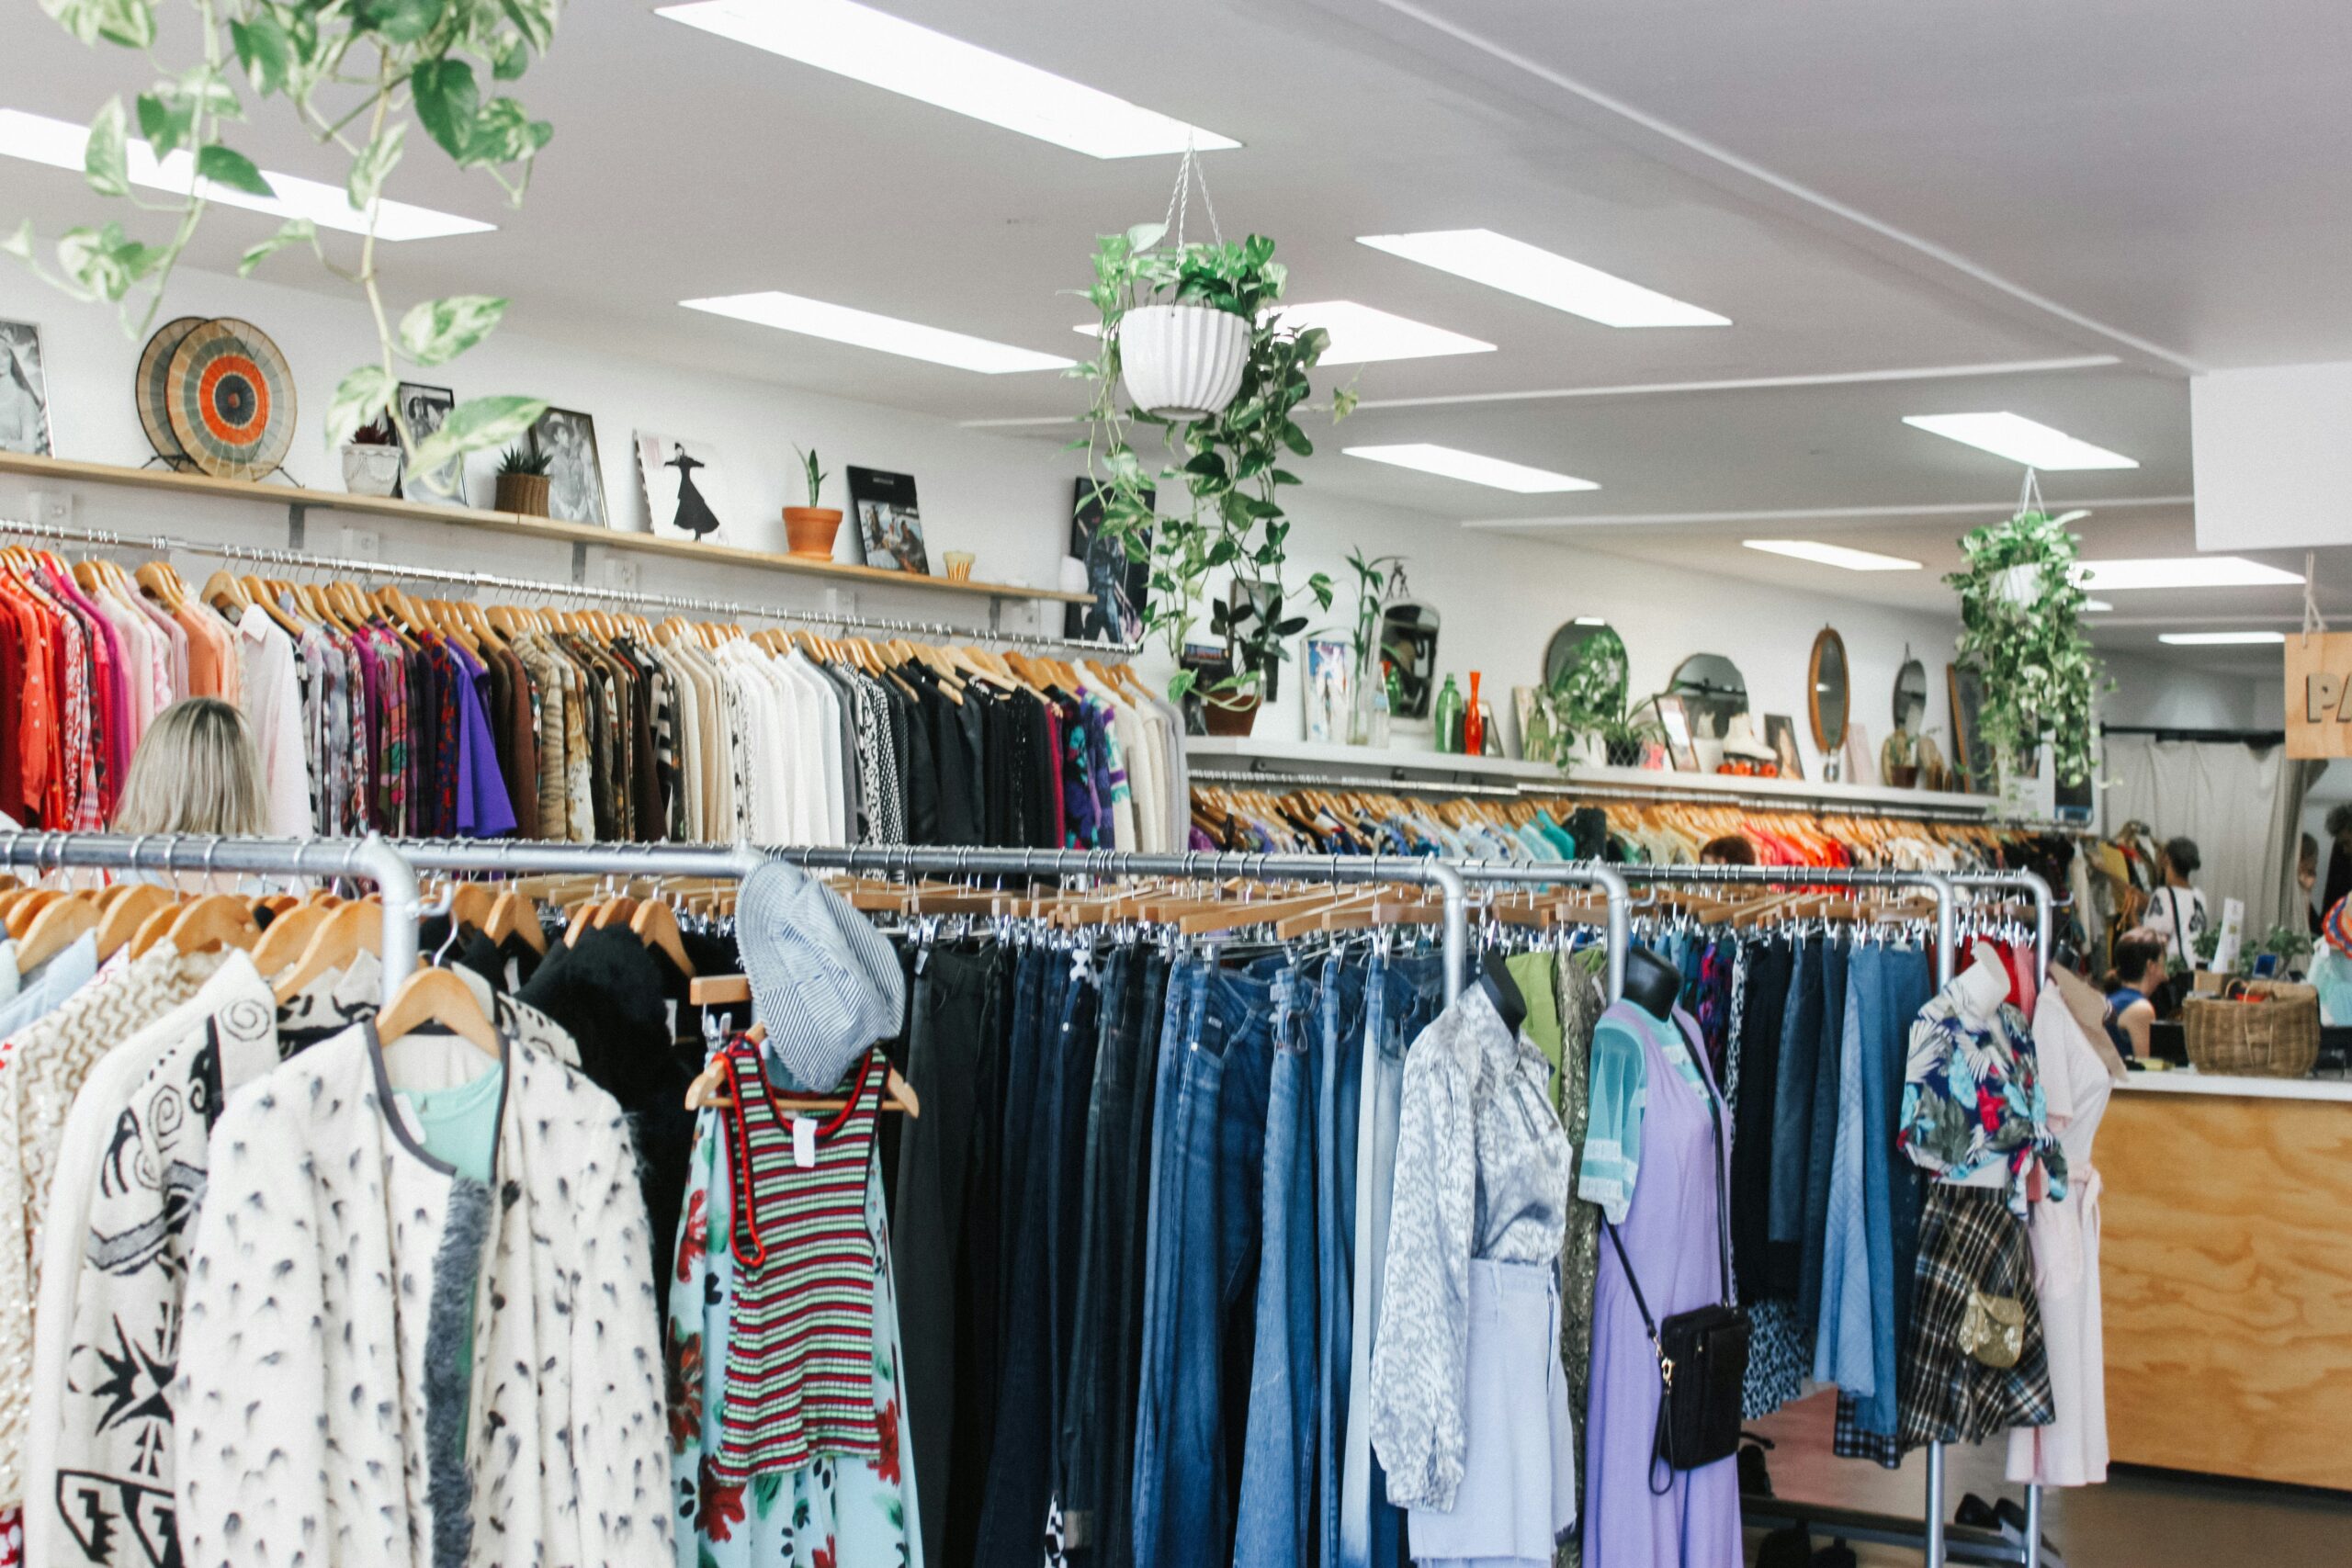 A thrift store with racks of clothing, shelves of knick-knacks, and bins of shoes. 